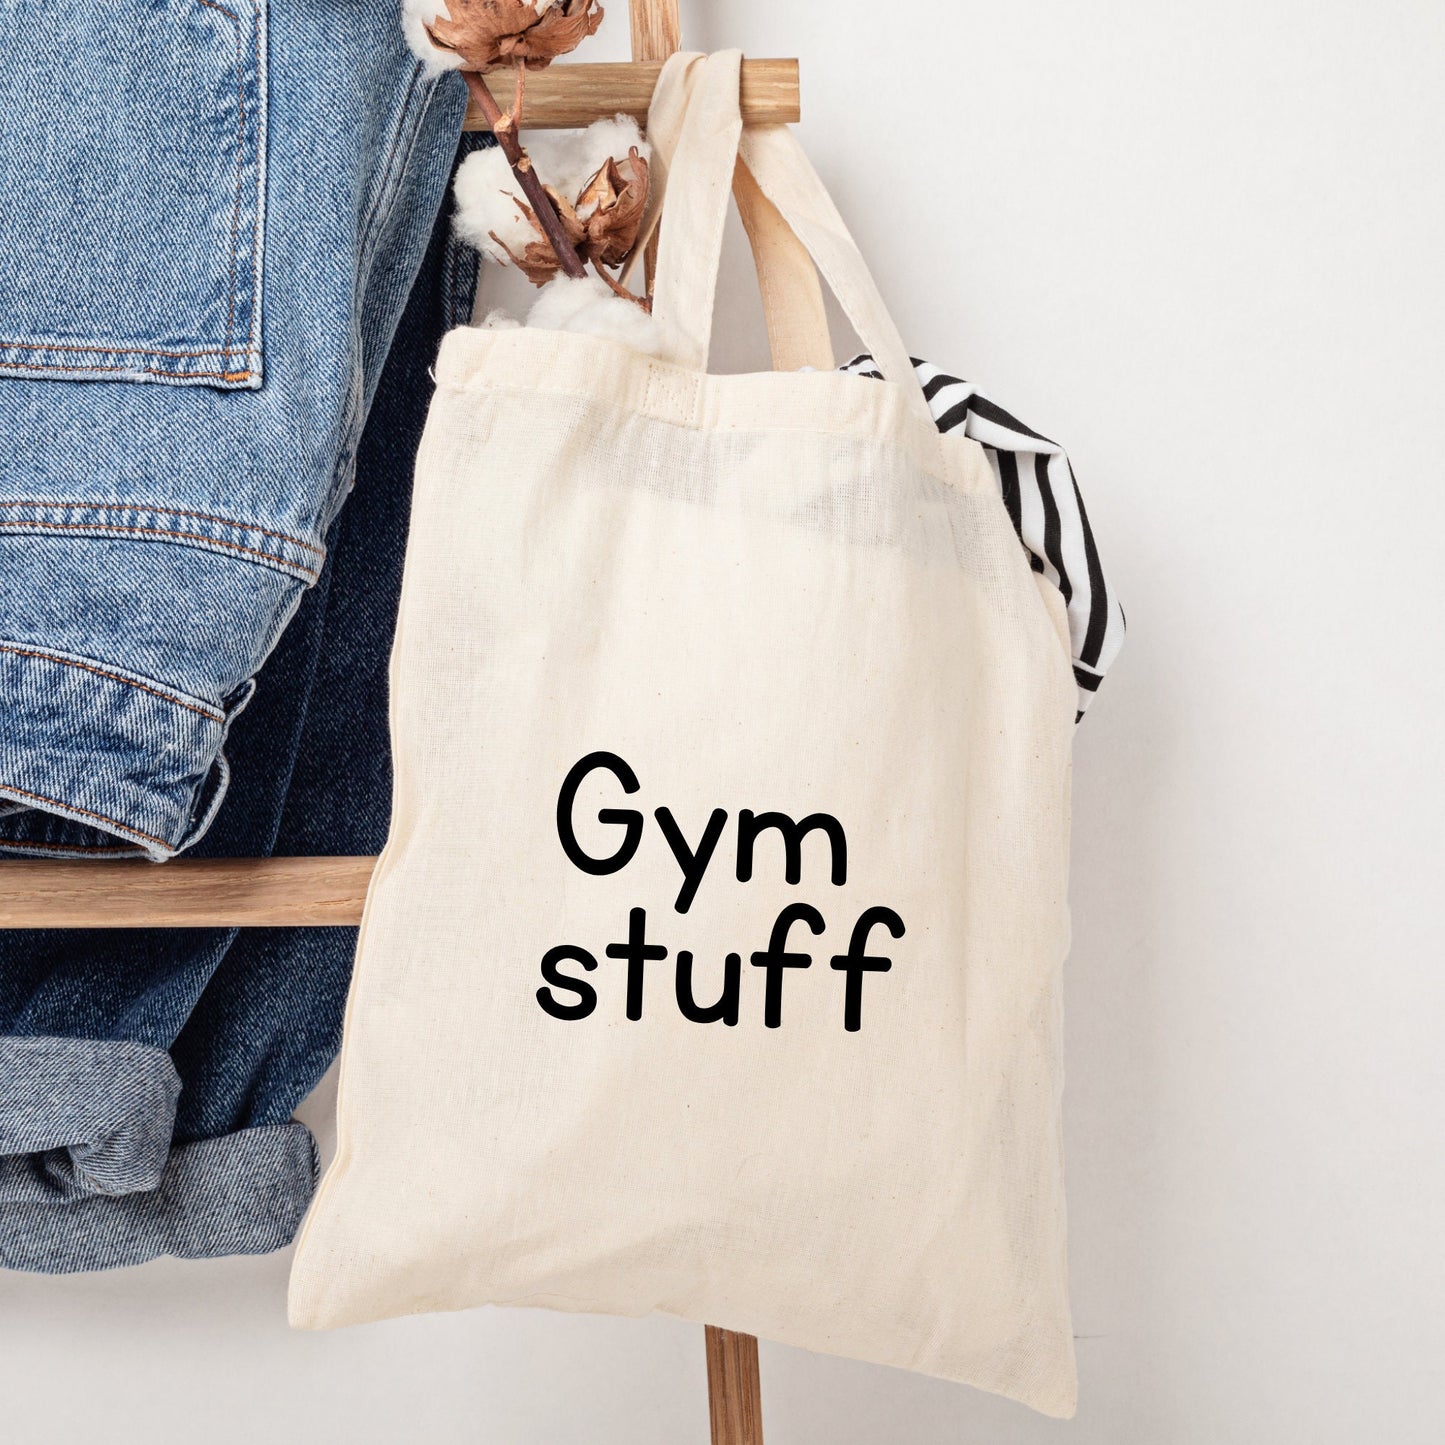 Gym stuff tote bag, gym kit, personalised gym bag, personal trainer thank you gifts, get fit new year resolutions